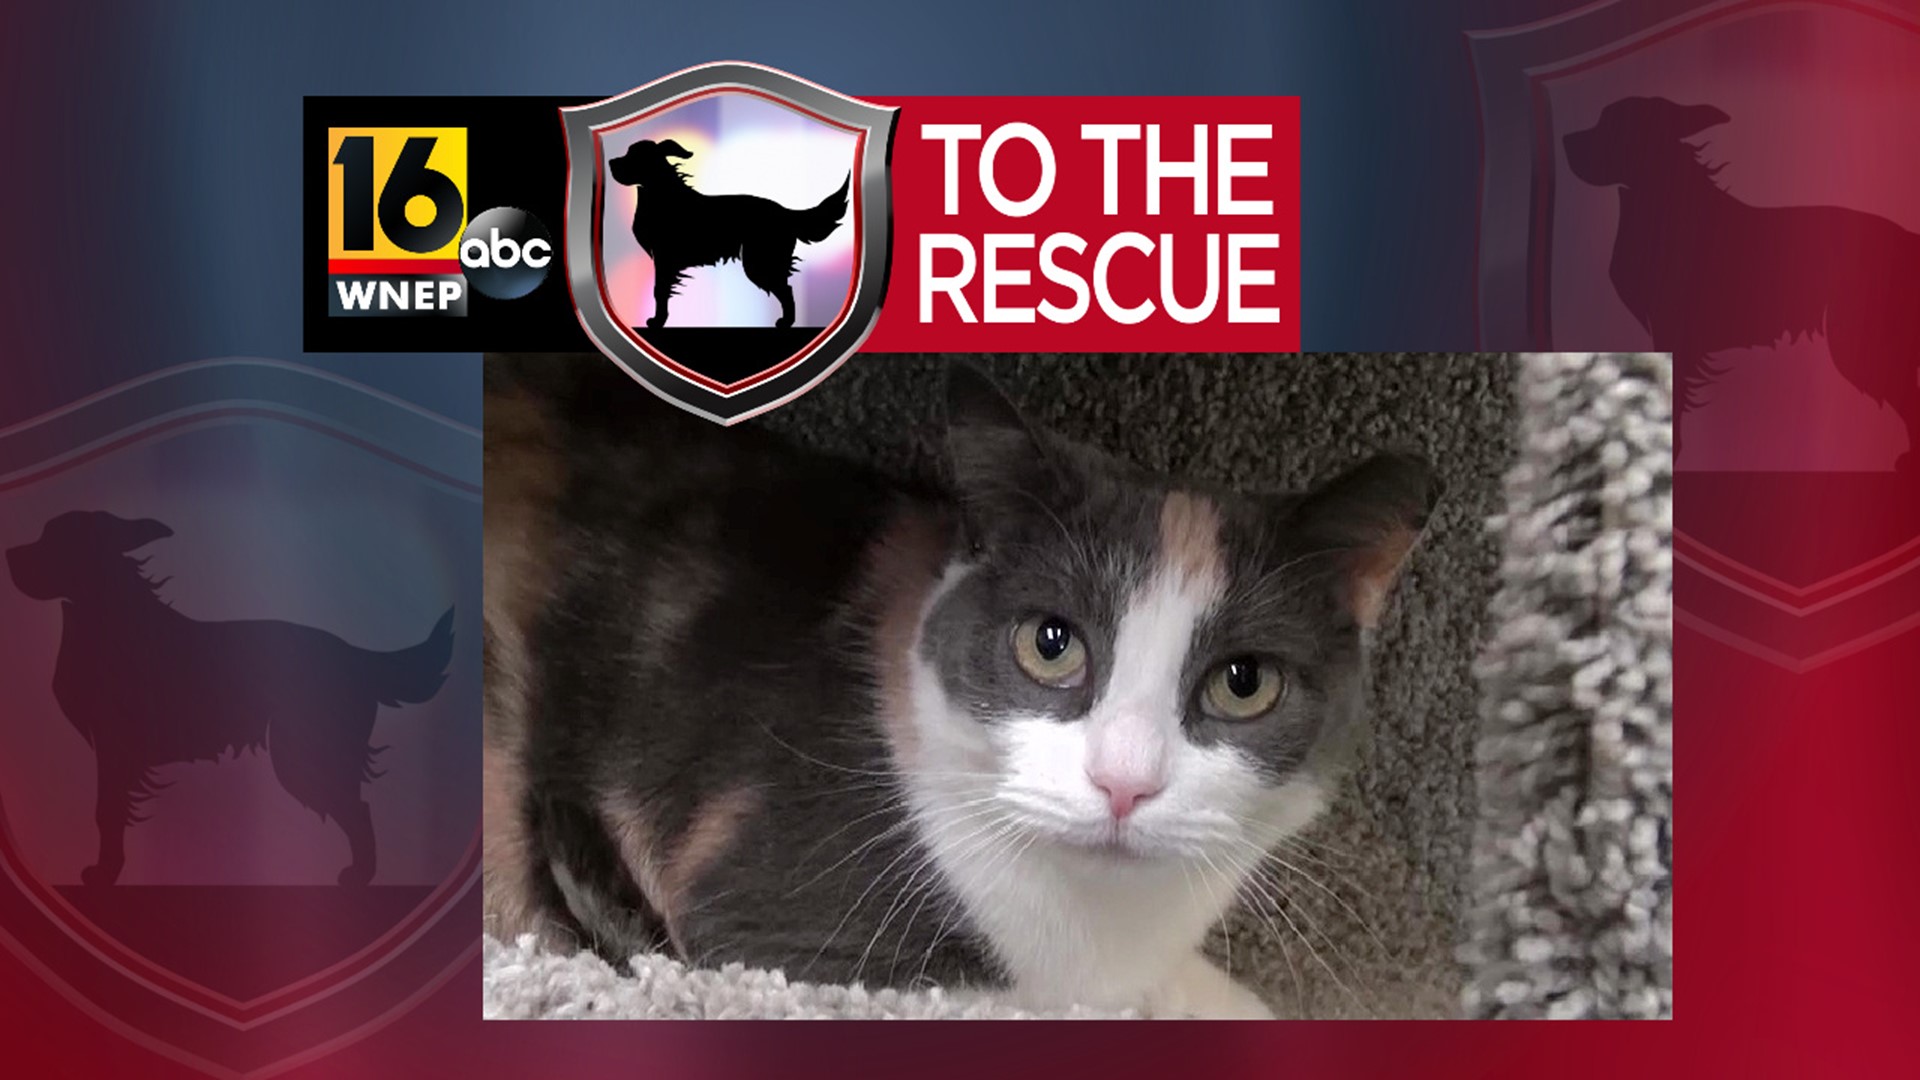 In this week's 16 To The Rescue, we meet Hummingbird, a cat who is sweet but shy, so she gets overlooked, but is a snuggling lap cat at heart.